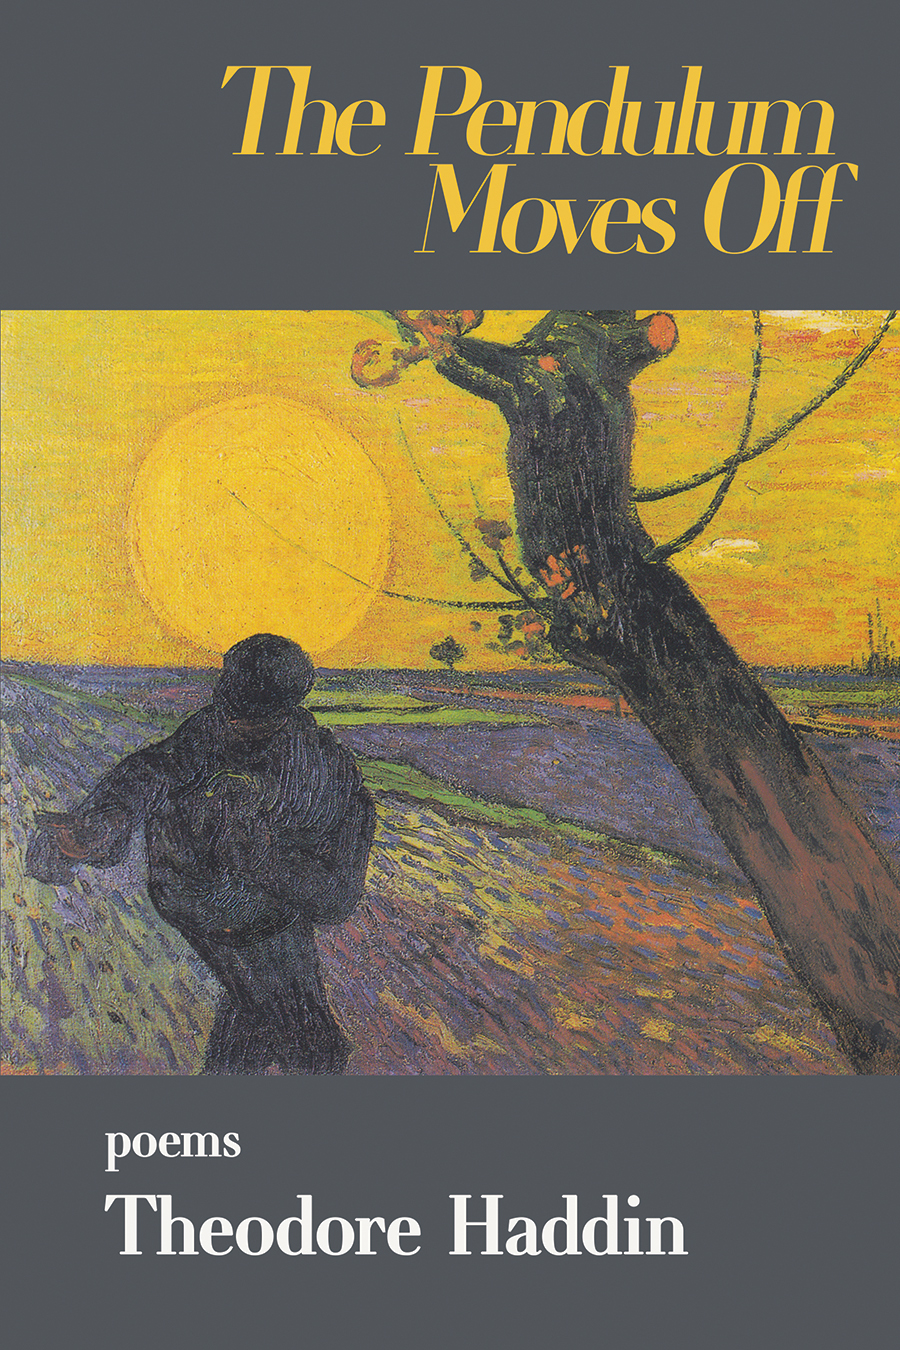 The Pendulum Moves Off: poems by Theodore Haddin. The cover shows a detail from "The Sower" an 1888 painting by Vincent Van Gogh, with the predominant color being gold from the setting sun. The human figure sowing seed forms vertical lines reflected by a heavily pruned Almond tree in the painting. lines of color represent the seed and the rows in the plowed field.